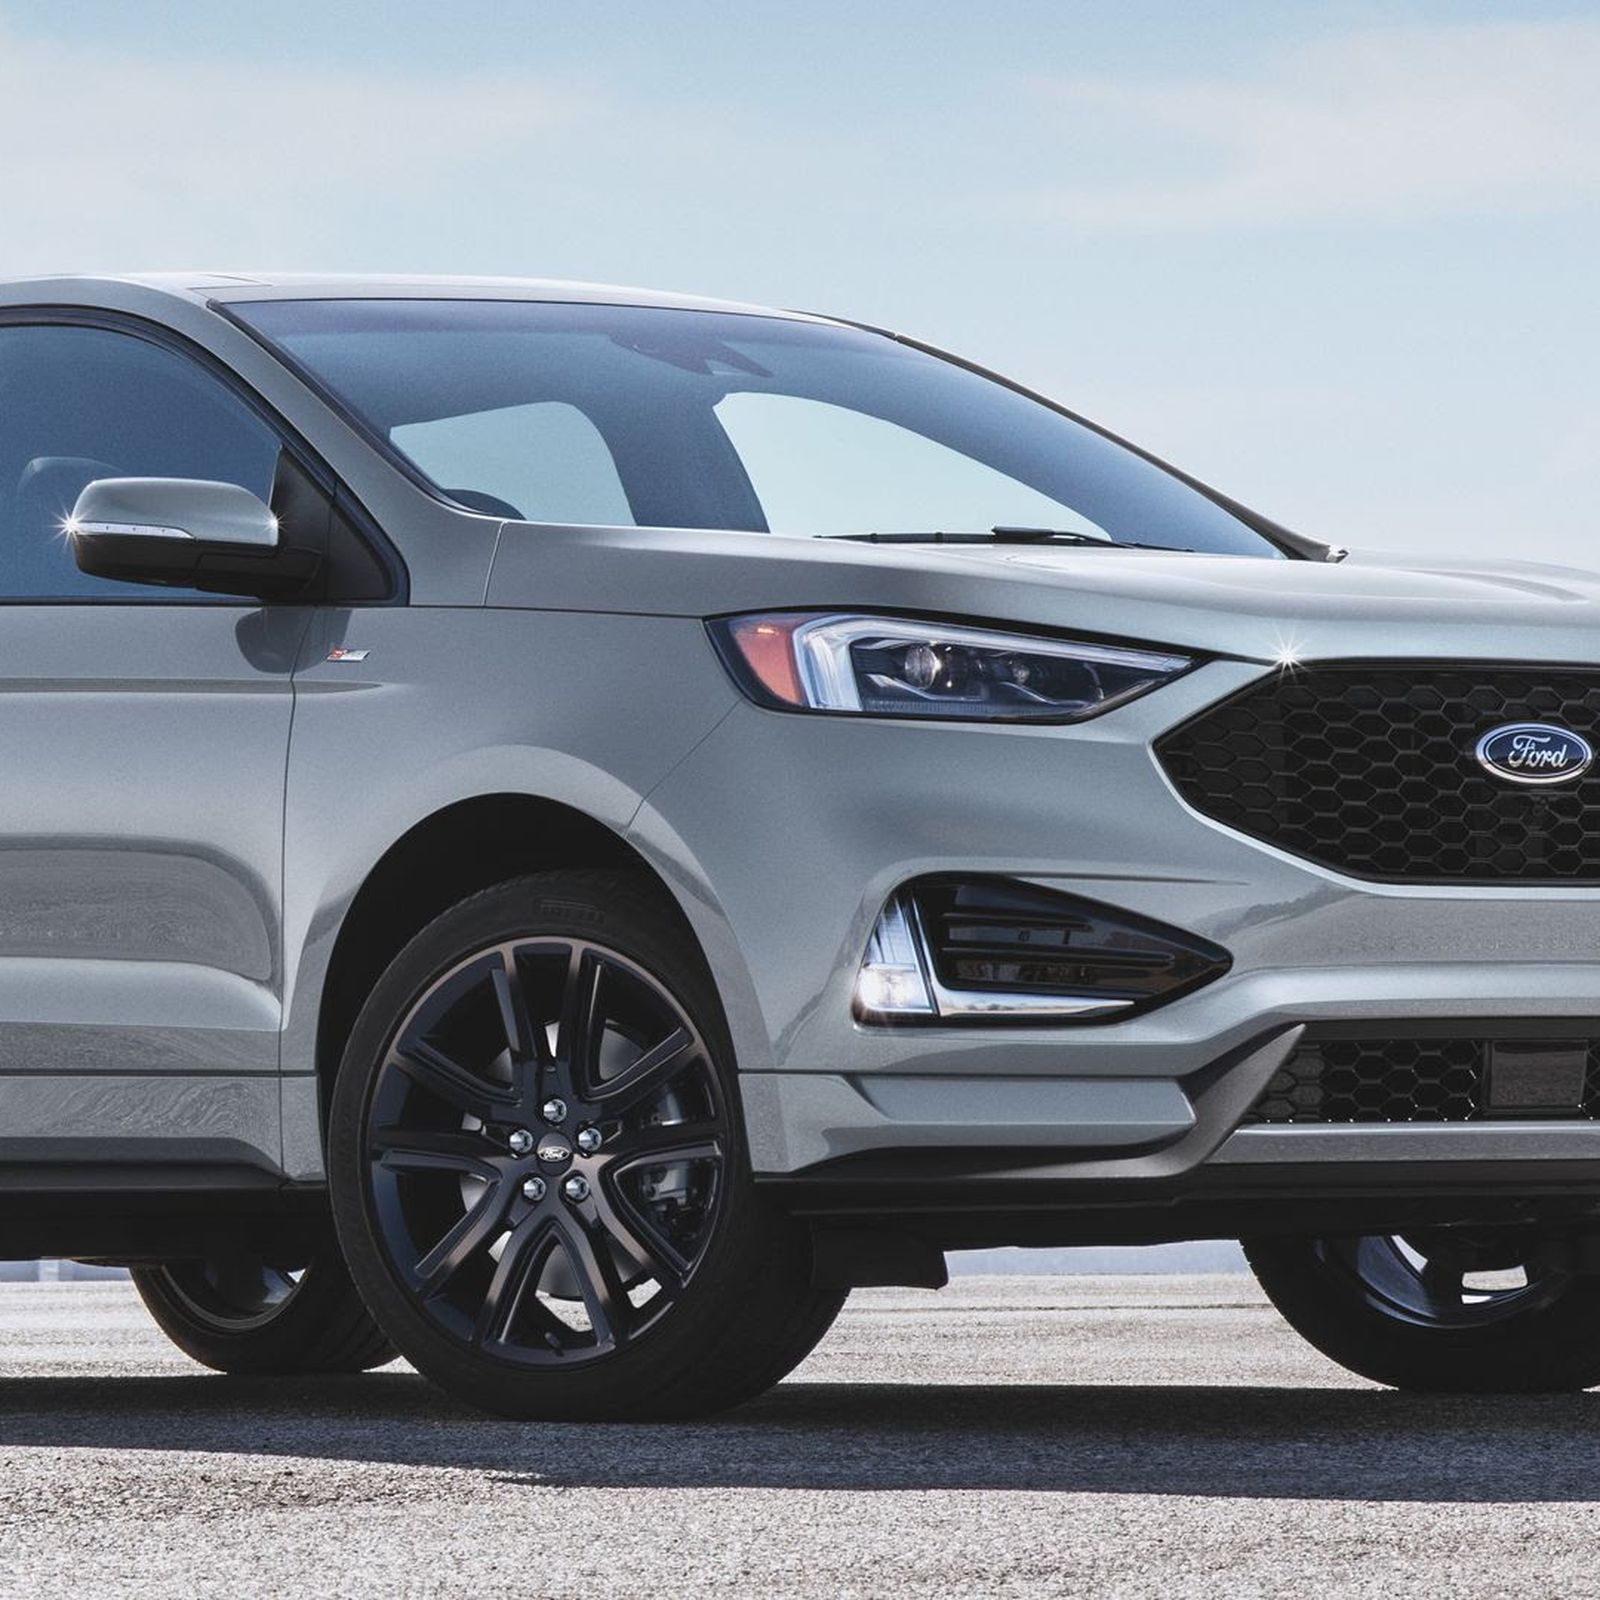 What we're driving: The 2020 Ford Edge ST